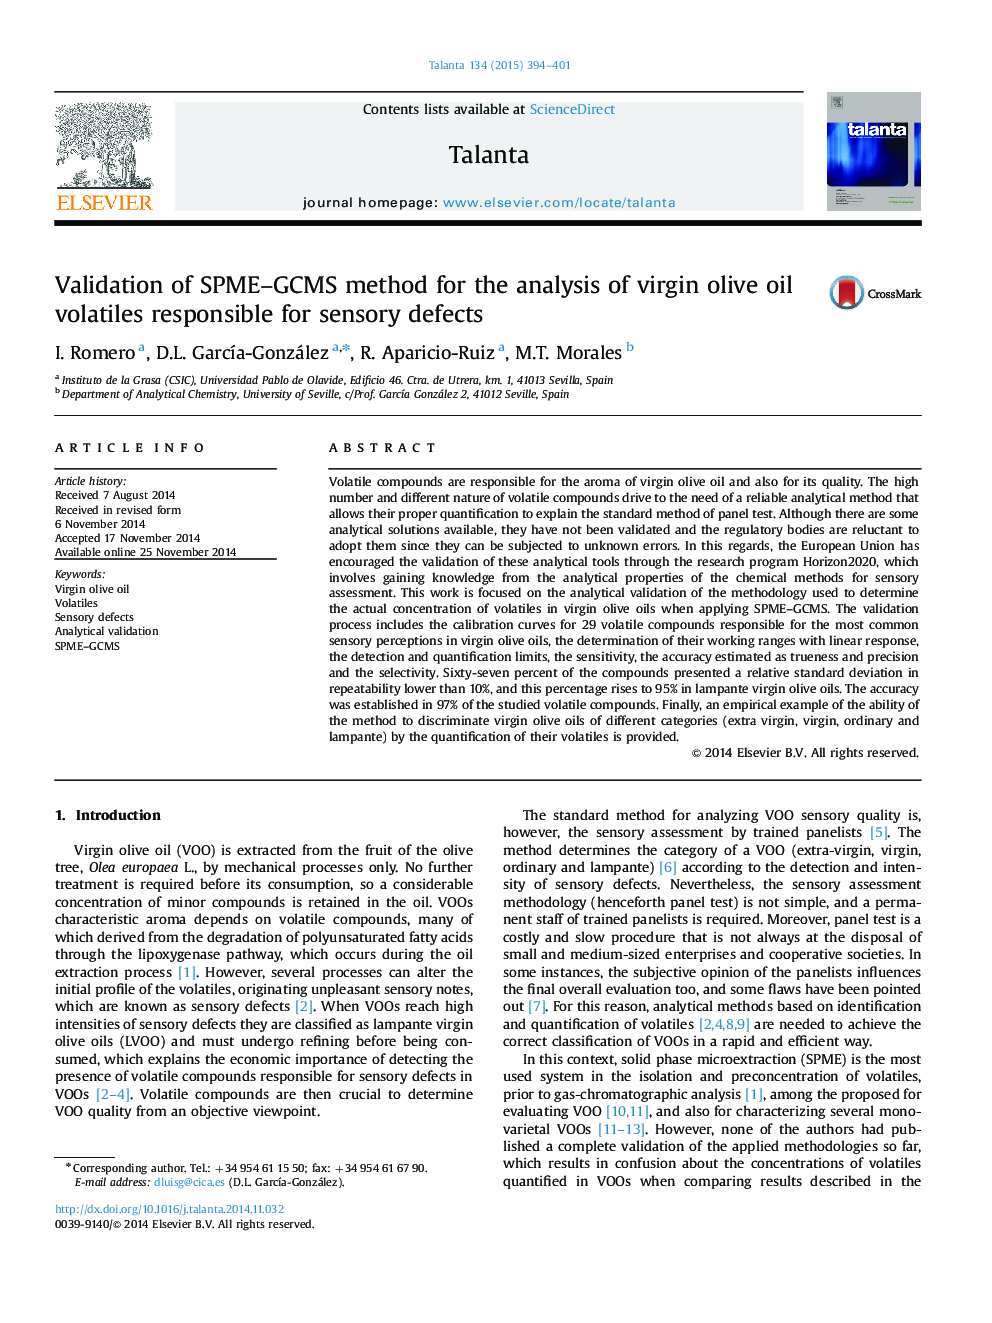 Validation of SPME–GCMS method for the analysis of virgin olive oil volatiles responsible for sensory defects